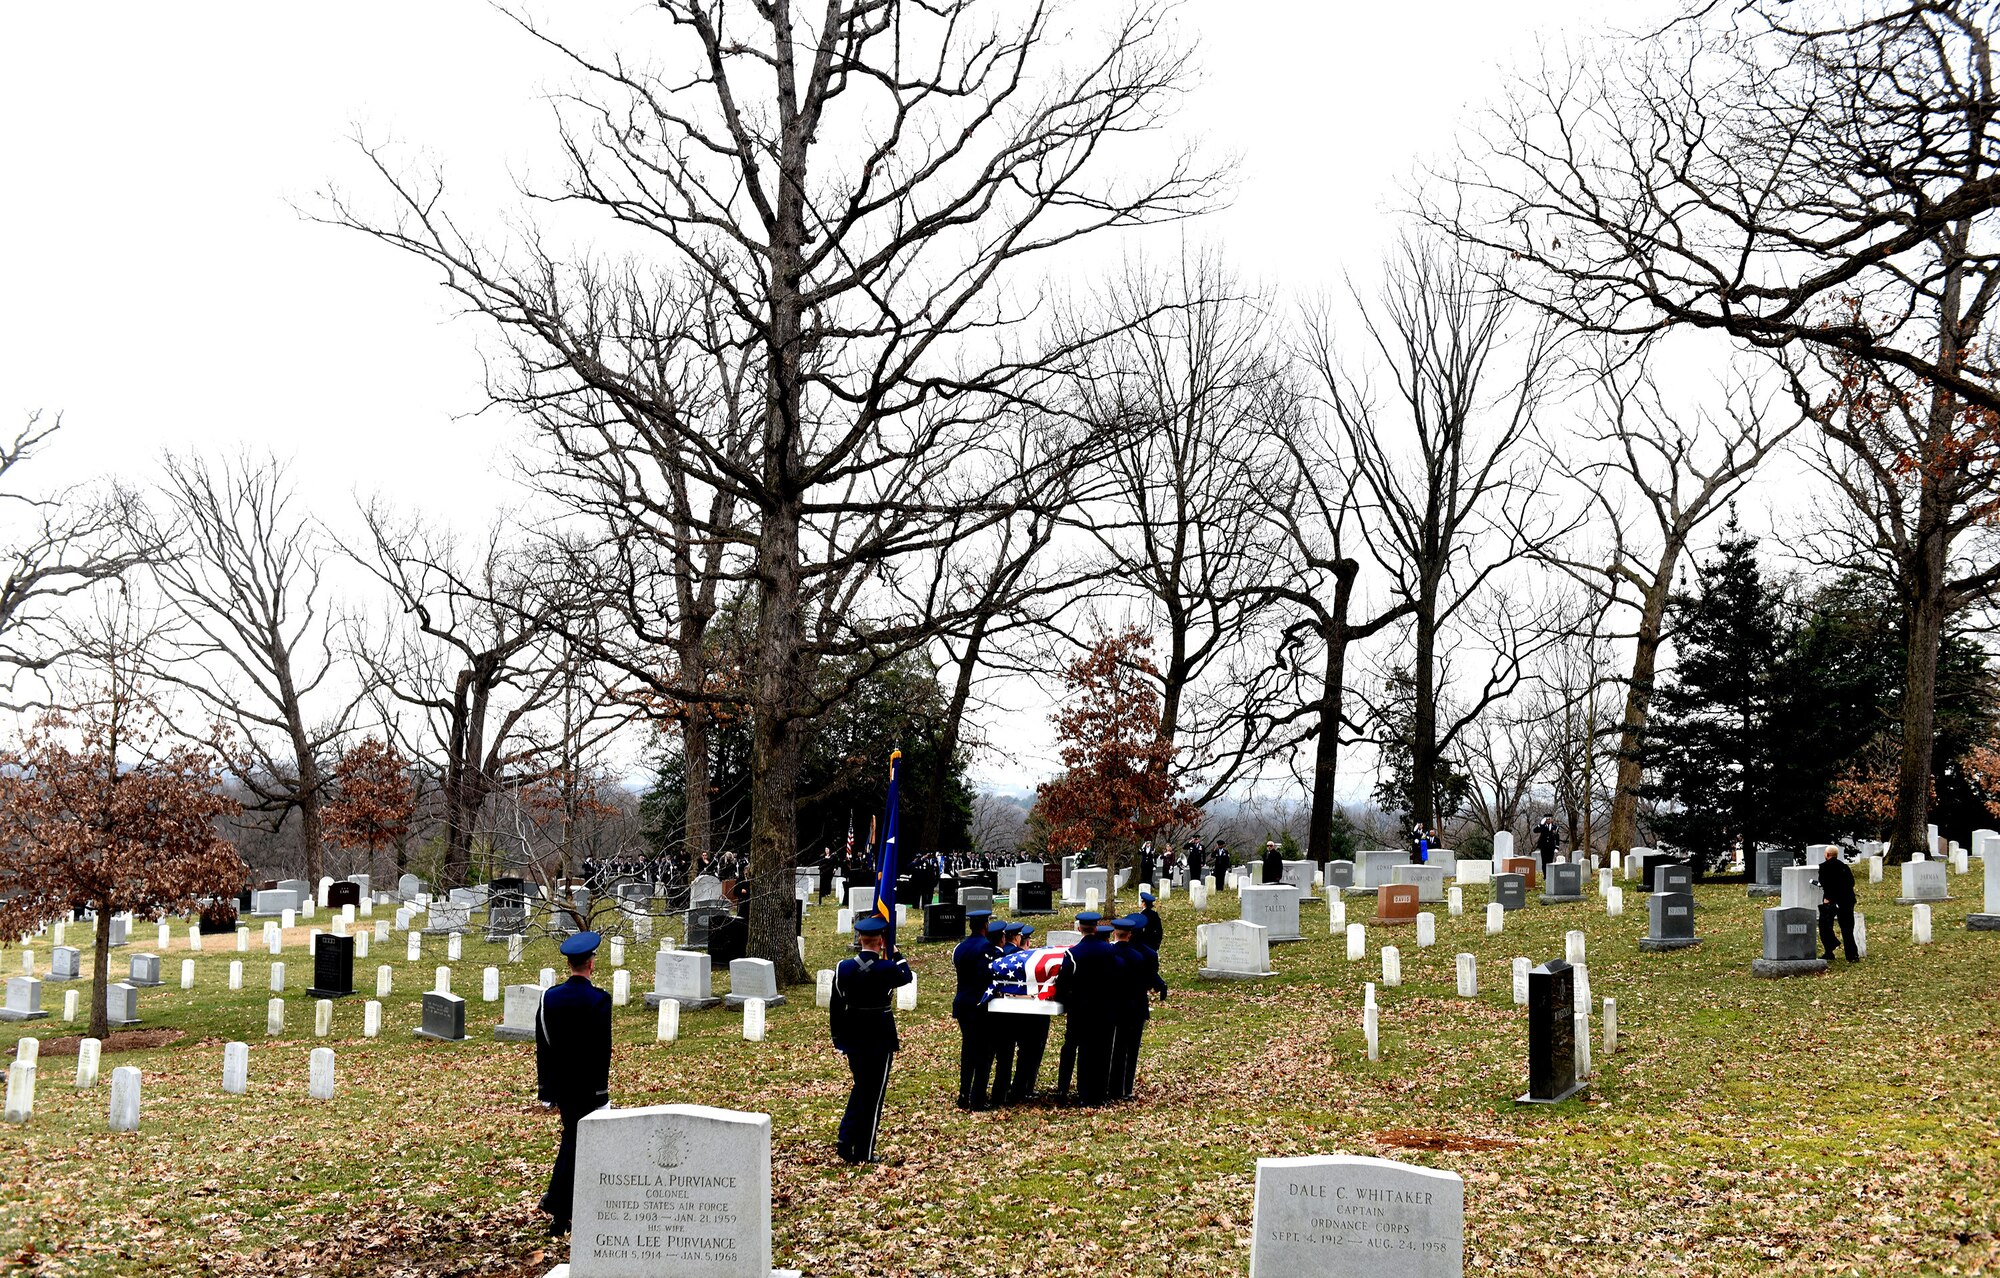 Friends and family of retired U.S. Air Force Maj. Gen. Marcelite Harris attend her full honors military funeral at Arlington National Cemetery, Arlington, Va., Feb. 7, 2019. Harris’s accomplishments include being the first woman aircraft maintenance officer, one of the first two women air officers commanding at the U.S. Air Force Academy and the first woman deputy commander for maintenance. She also served as a White House social aide during the Carter administration. (U.S. Air Force photo by Staff Sgt. Rusty Frank)